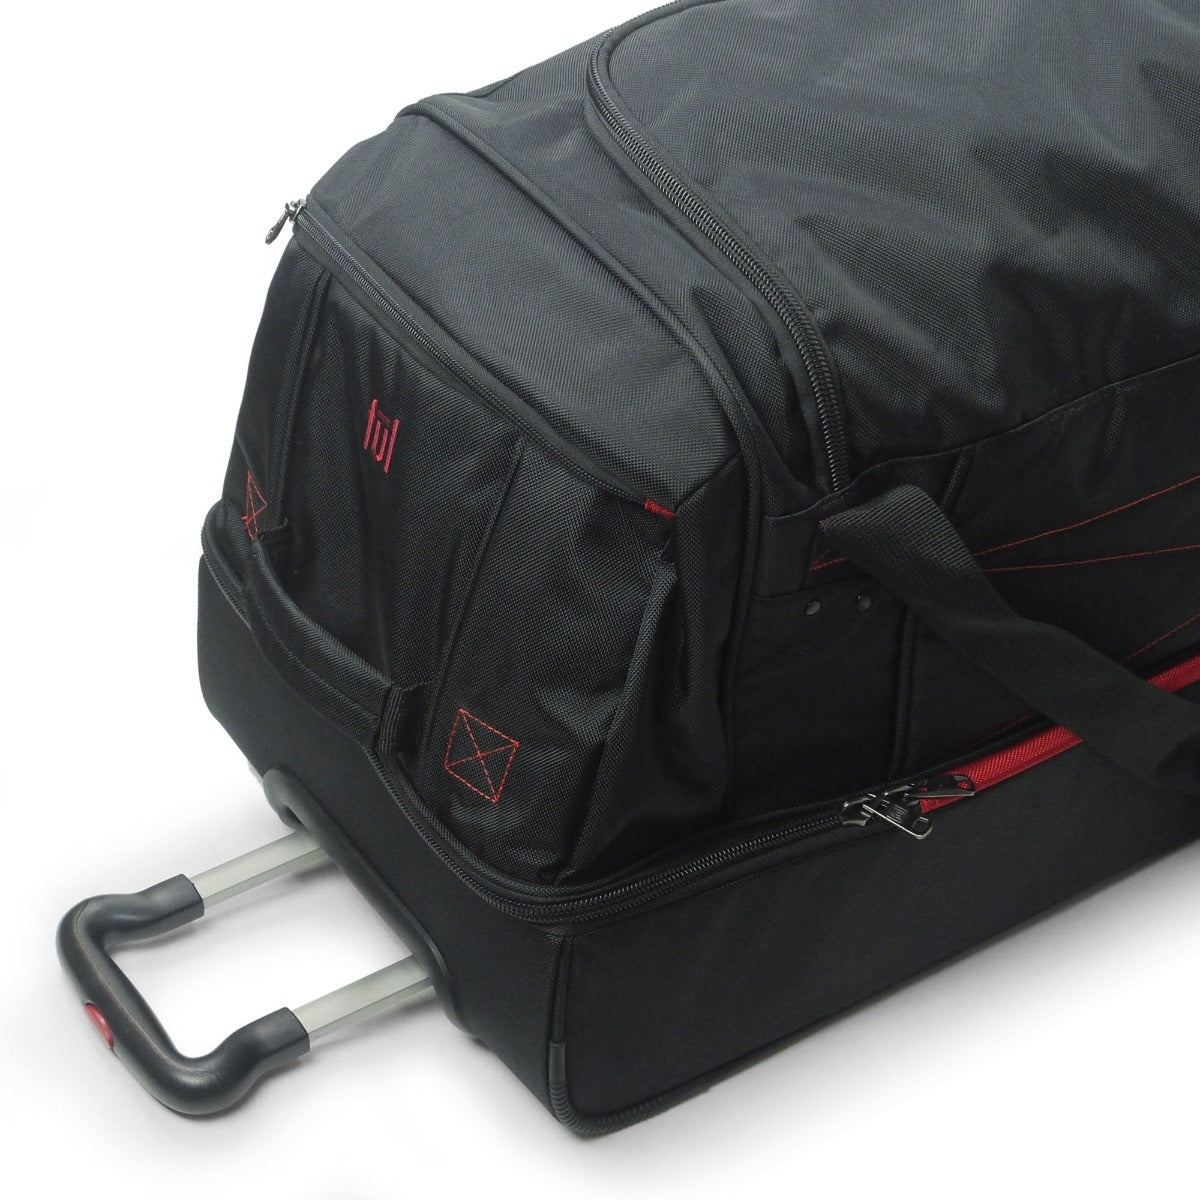 Tour Manager FŪL 36" Rolling Duffel Bag retractable pull handle black wheeled duffle